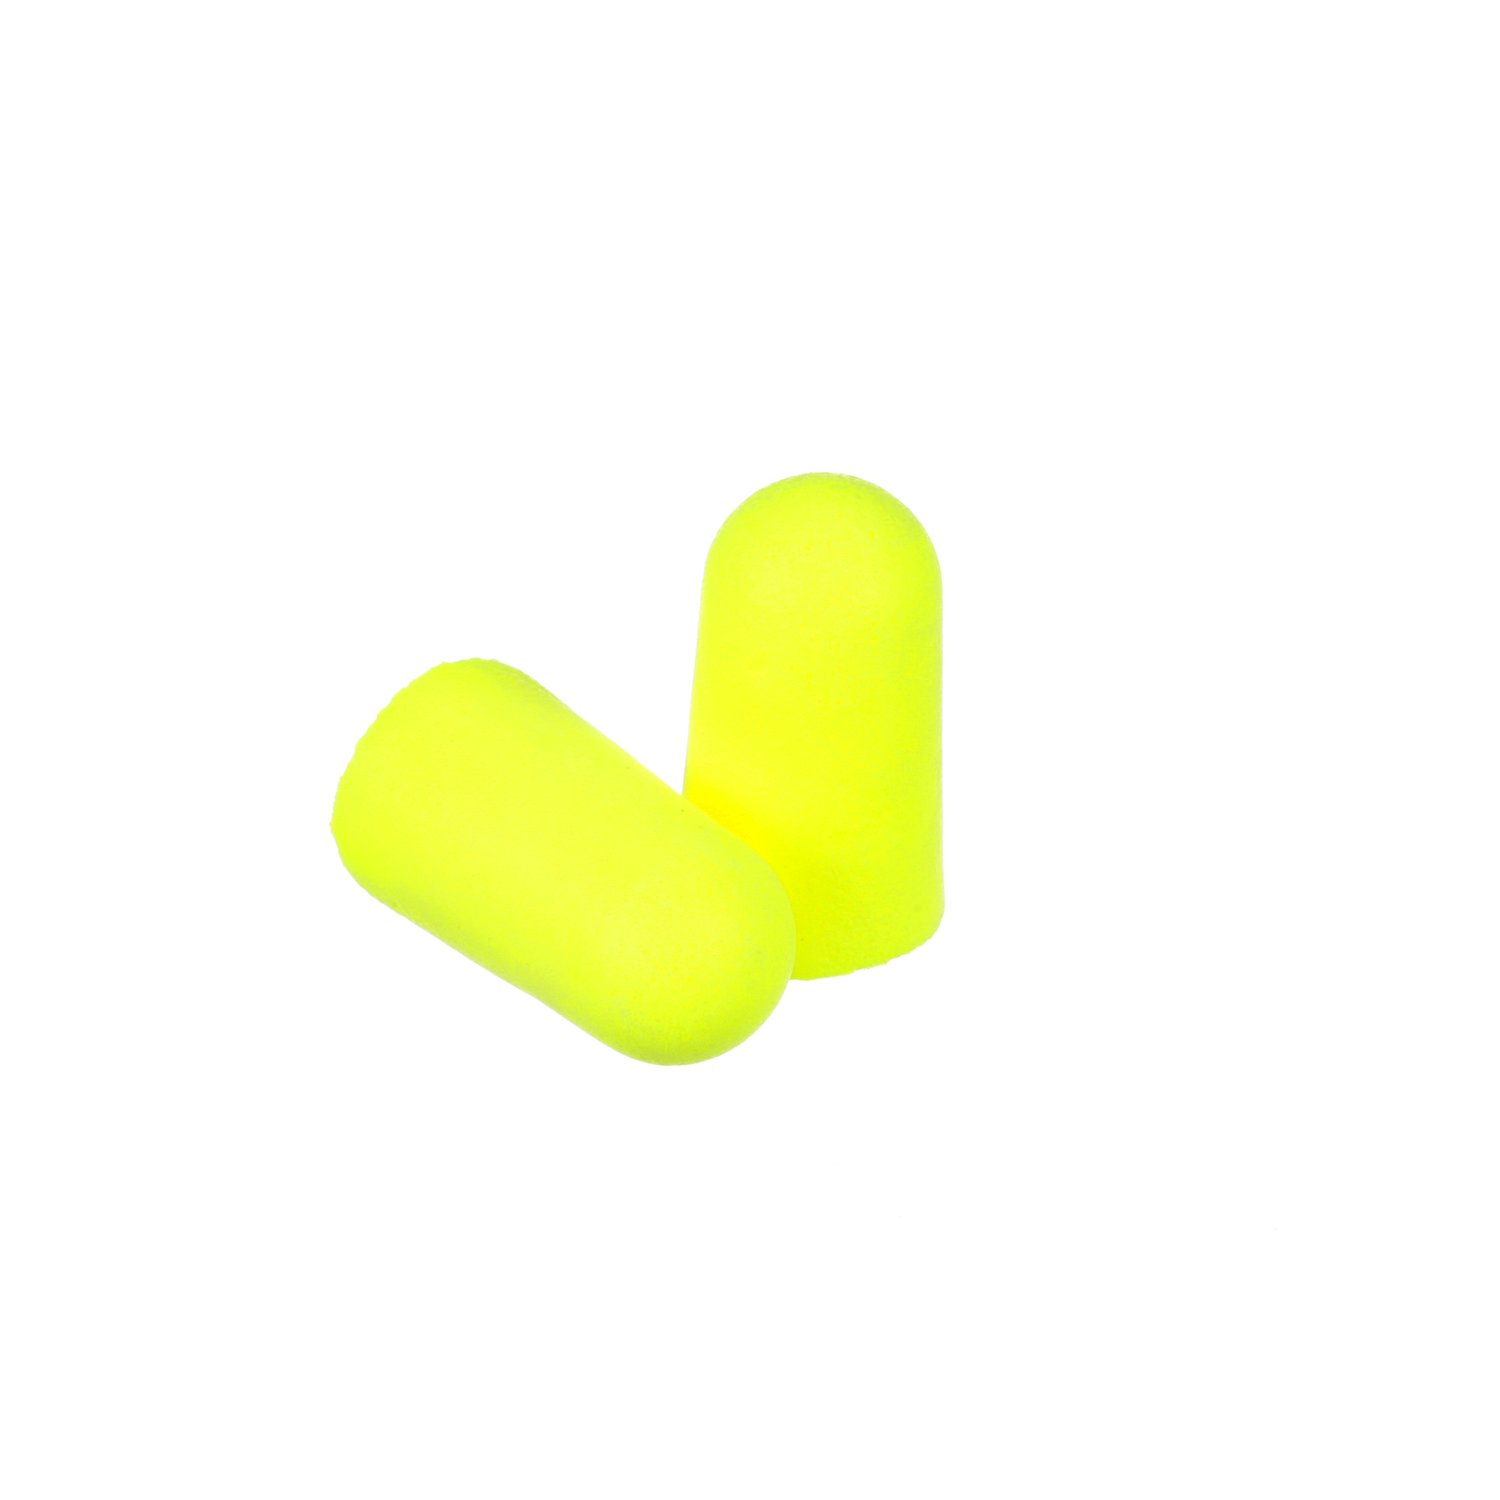 7000127175 - 3M E-A-Rsoft Yellow Neons Earplugs 312-1251, Uncorded, Poly Bag,
Large Size, 2000 Pair/Case